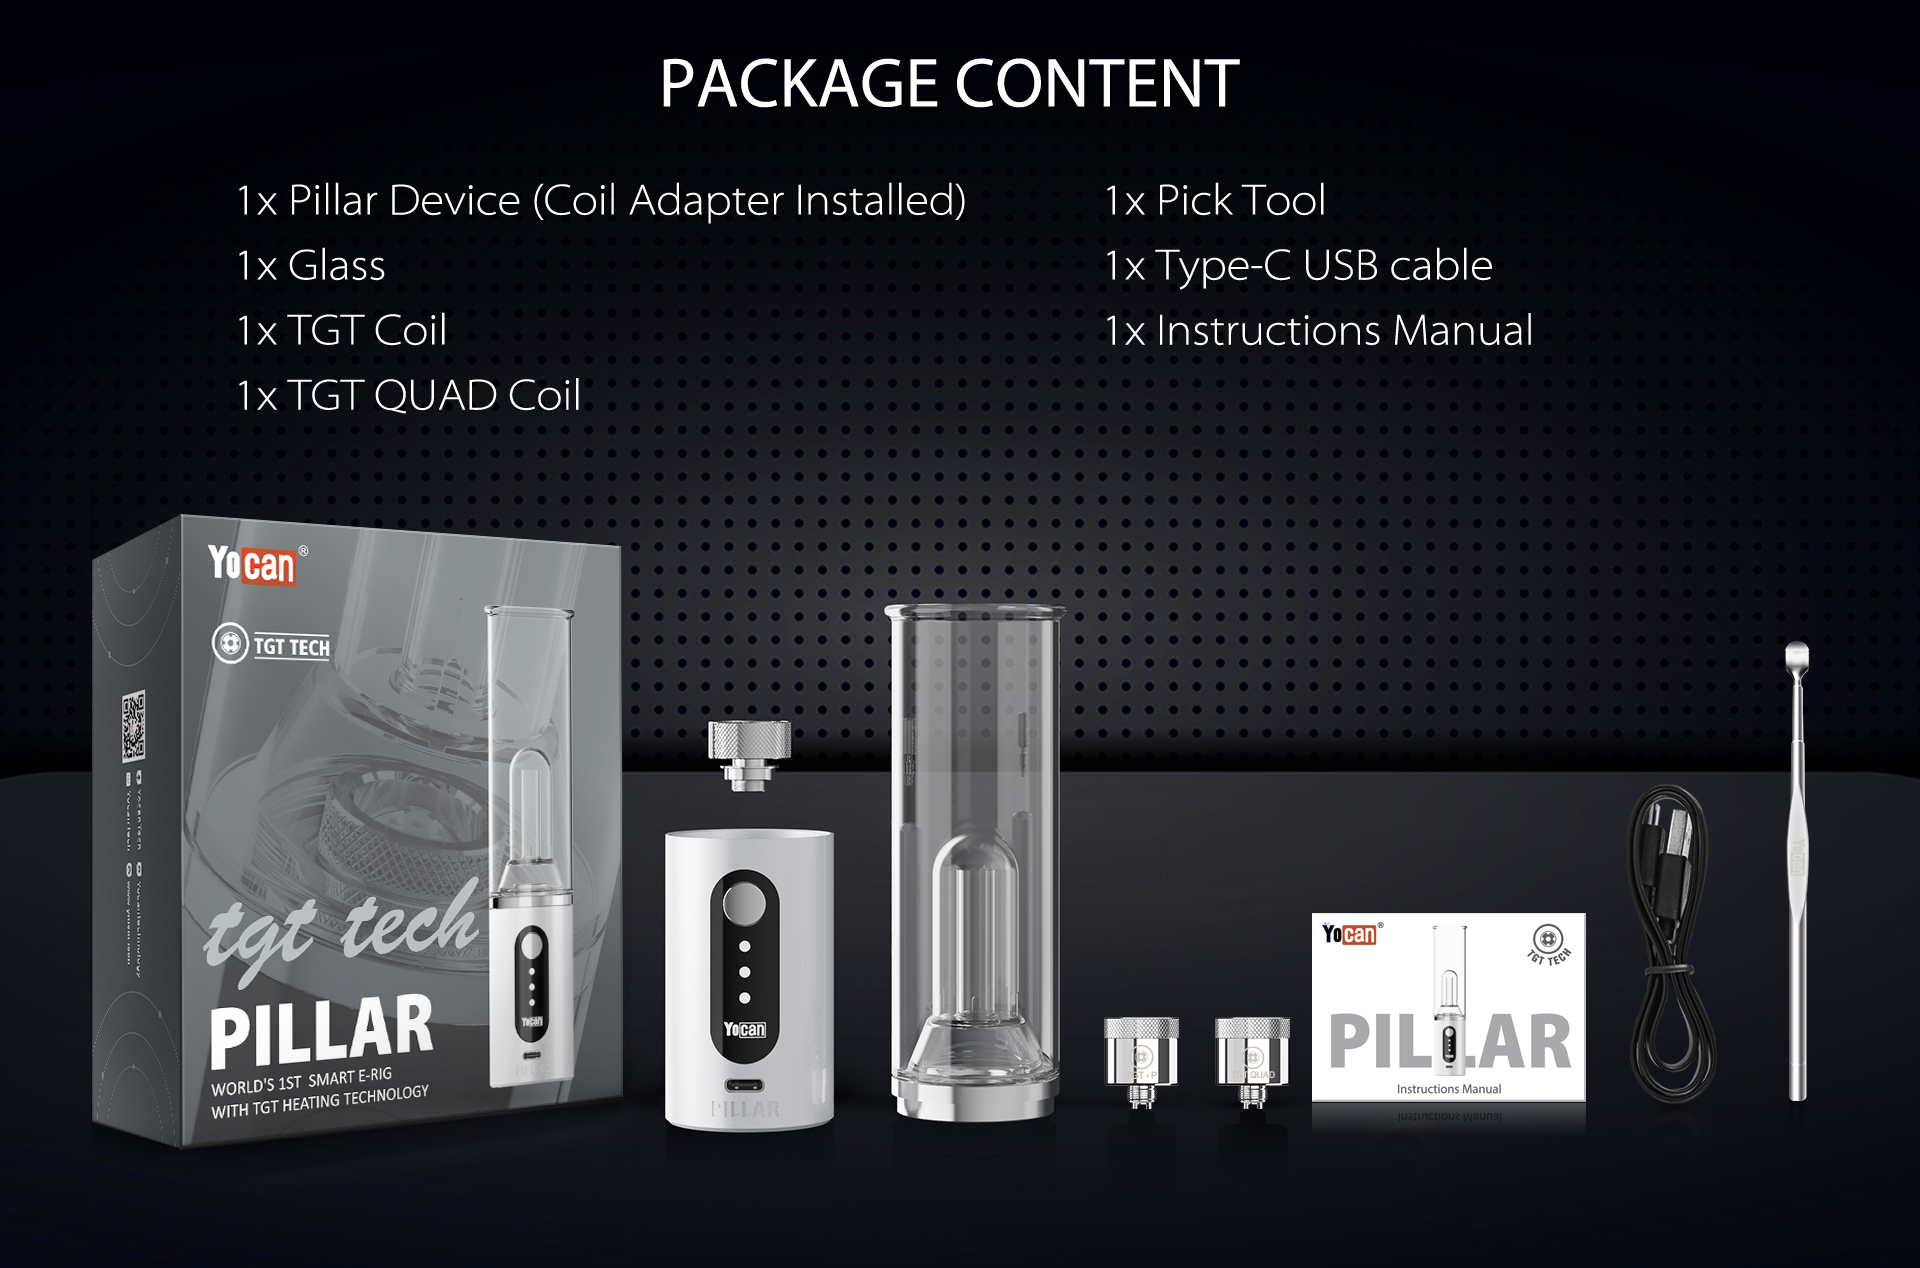 The package content of Yocan Pillar Erig.